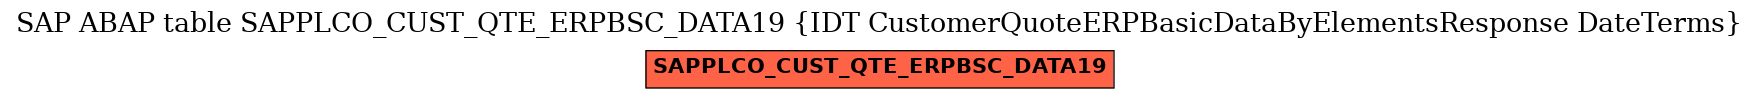 E-R Diagram for table SAPPLCO_CUST_QTE_ERPBSC_DATA19 (IDT CustomerQuoteERPBasicDataByElementsResponse DateTerms)